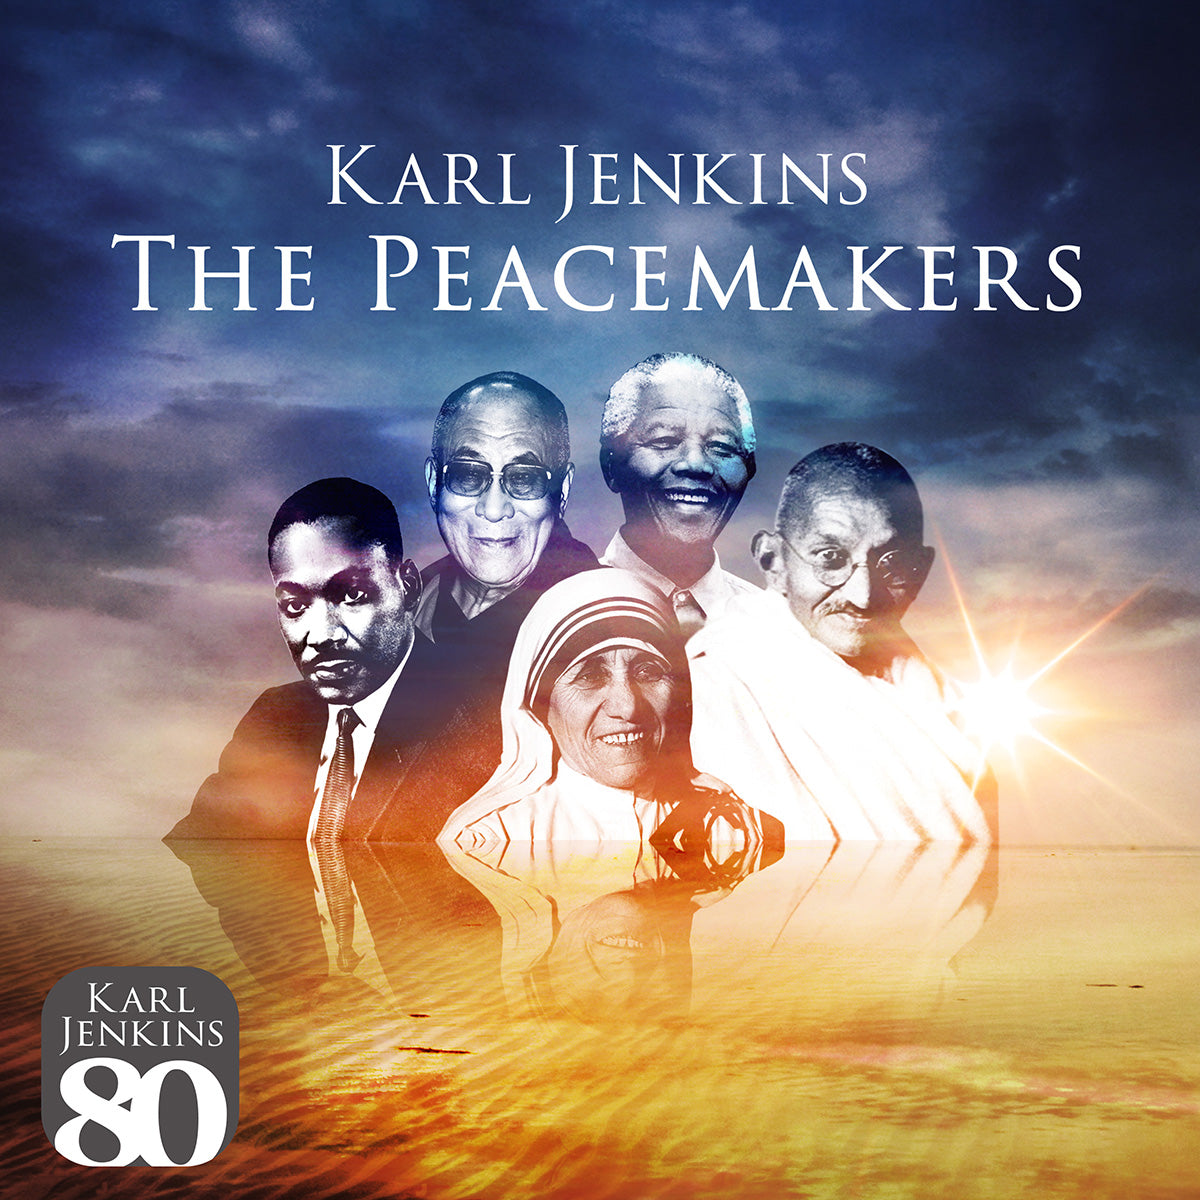 Karl Jenkins - The Peacemakers: CD